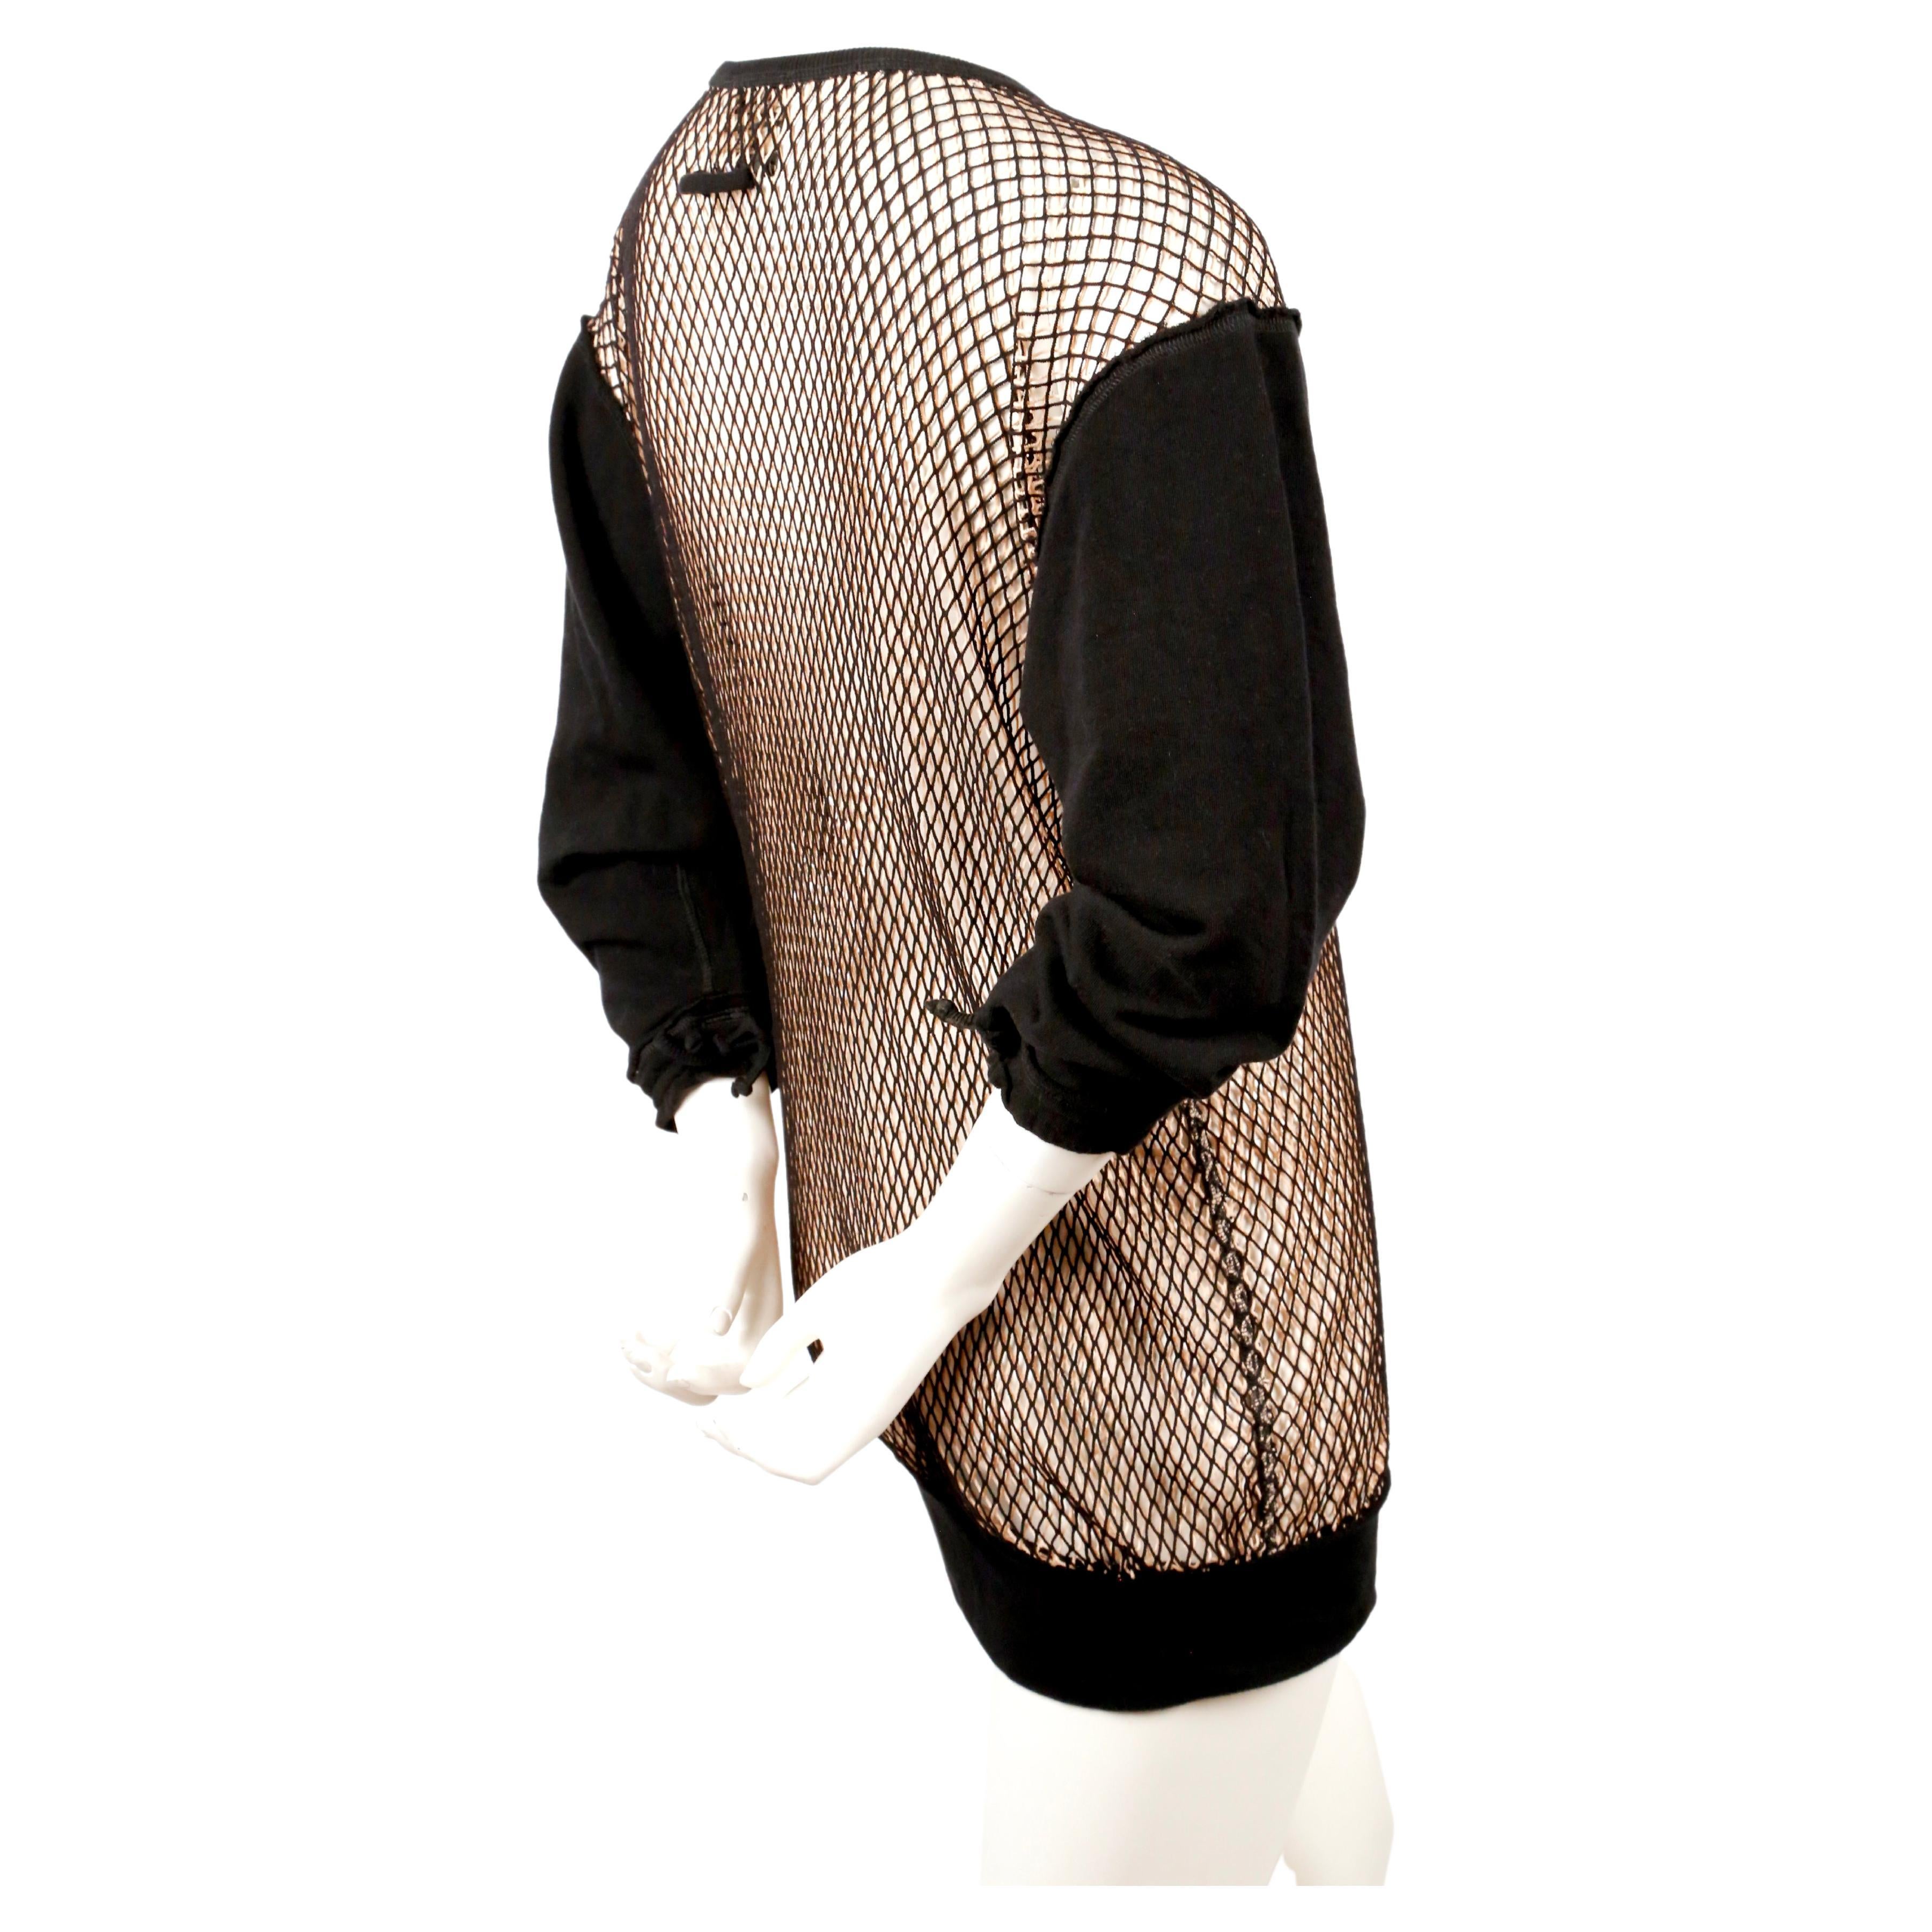 2013 JEAN PAUL GAULTIER double layered fishnet RUNWAY tunic In Good Condition For Sale In San Fransisco, CA